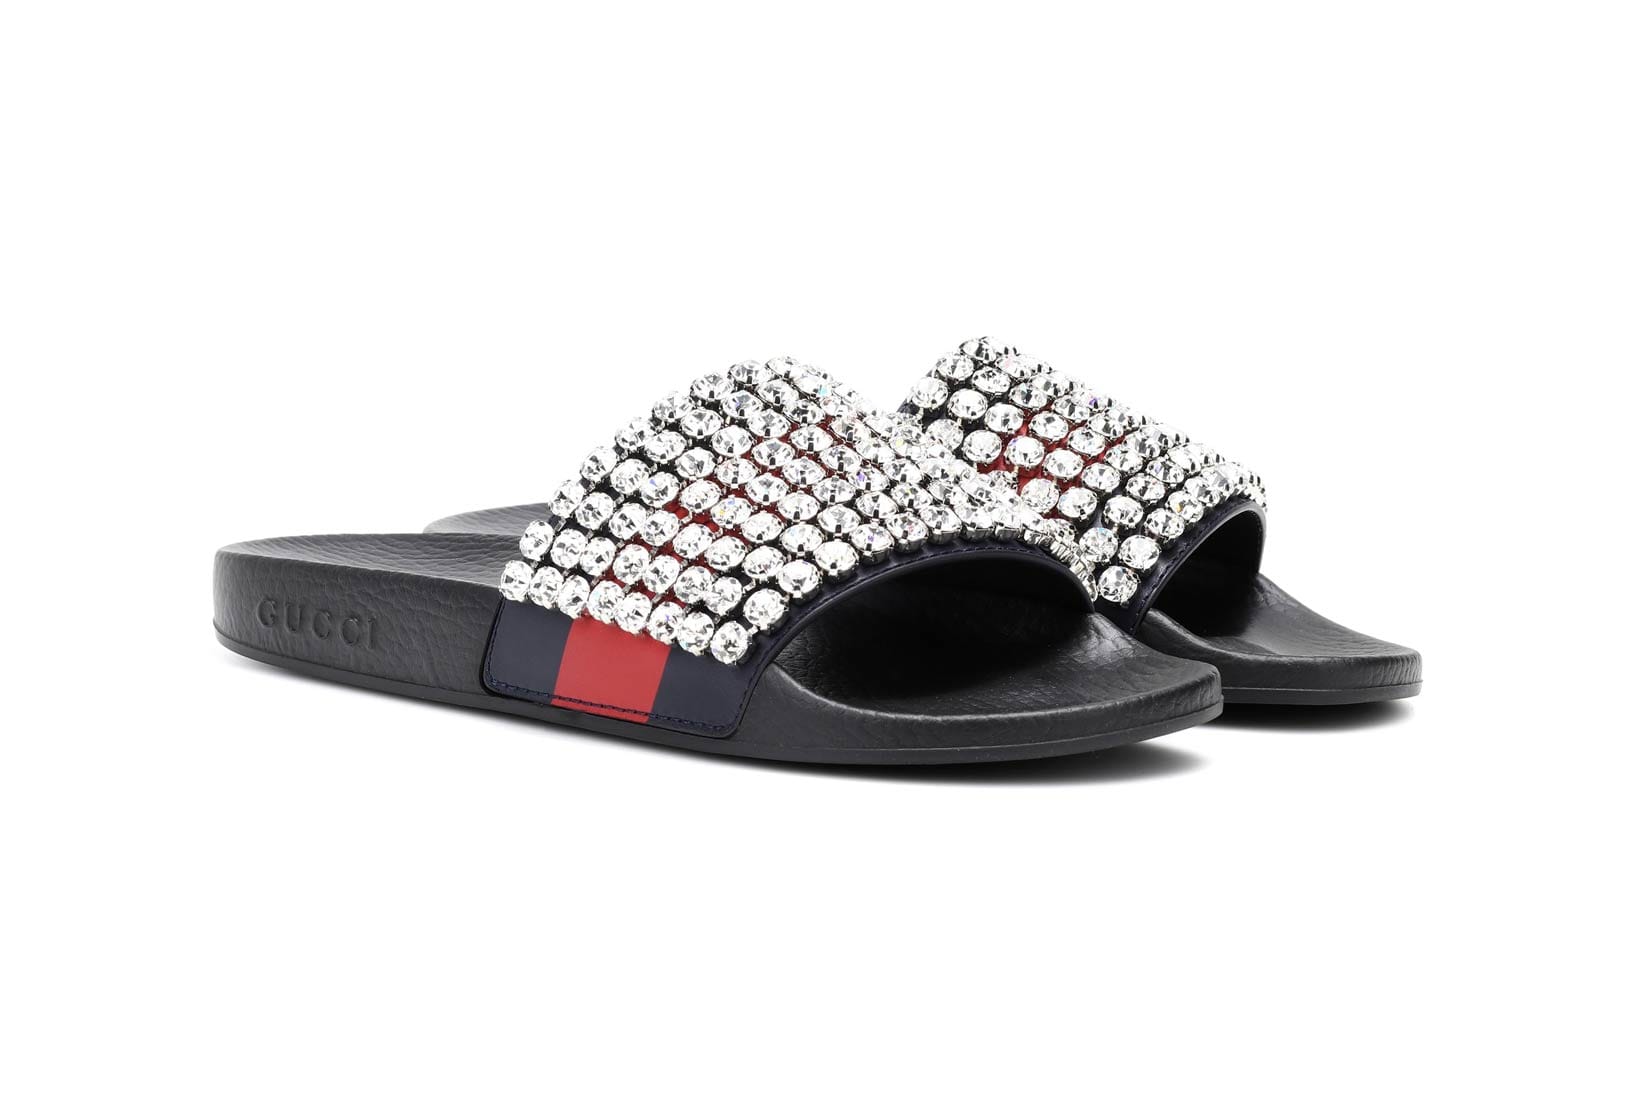 gucci flip flops with pearls